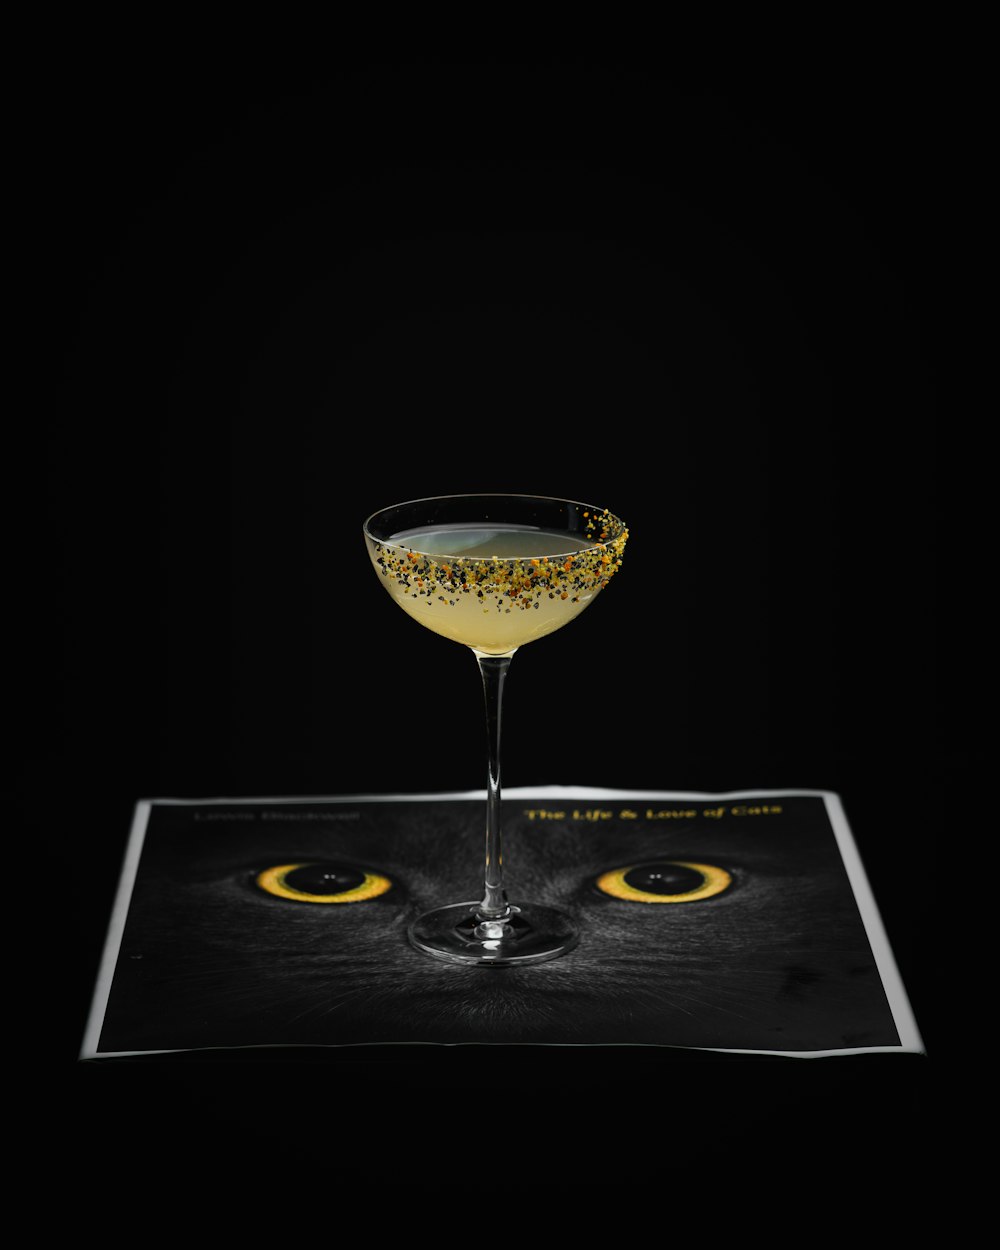 a cat's eye is shown in a martini glass